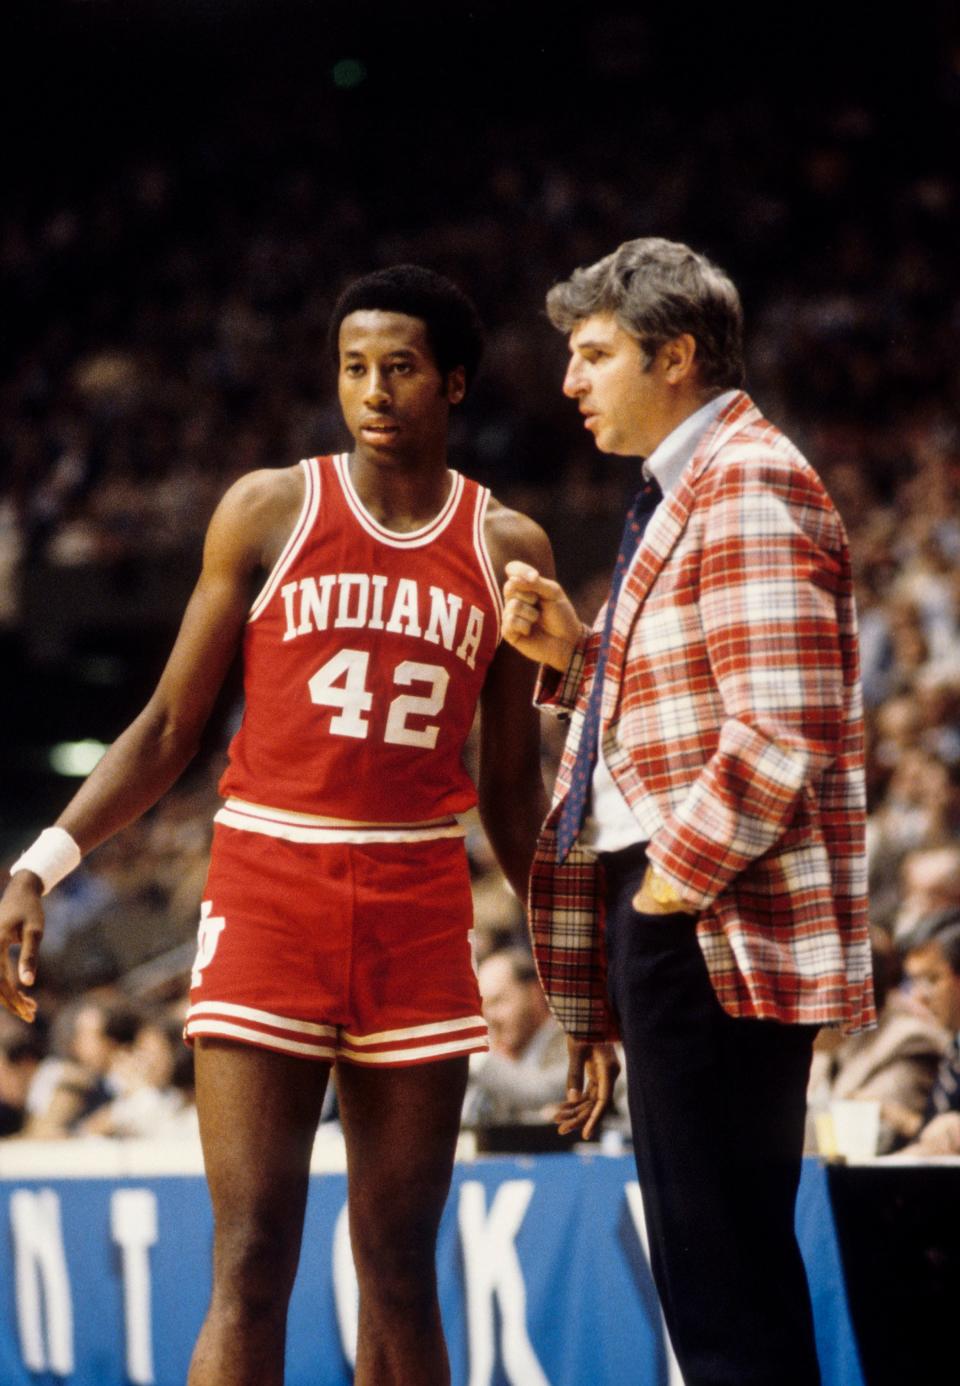 Dec 15, 1979; Lexington, KY, USA; FILE PHOTO; Indiana Hoosiers forward Mike Woodson (42) and head coach Bobby Knight talk on the sideline against the Kentucky Wildcats at Rupp Arena during the 1979-80 season. Mandatory Credit: Malcolm Emmons-USA TODAY Sports